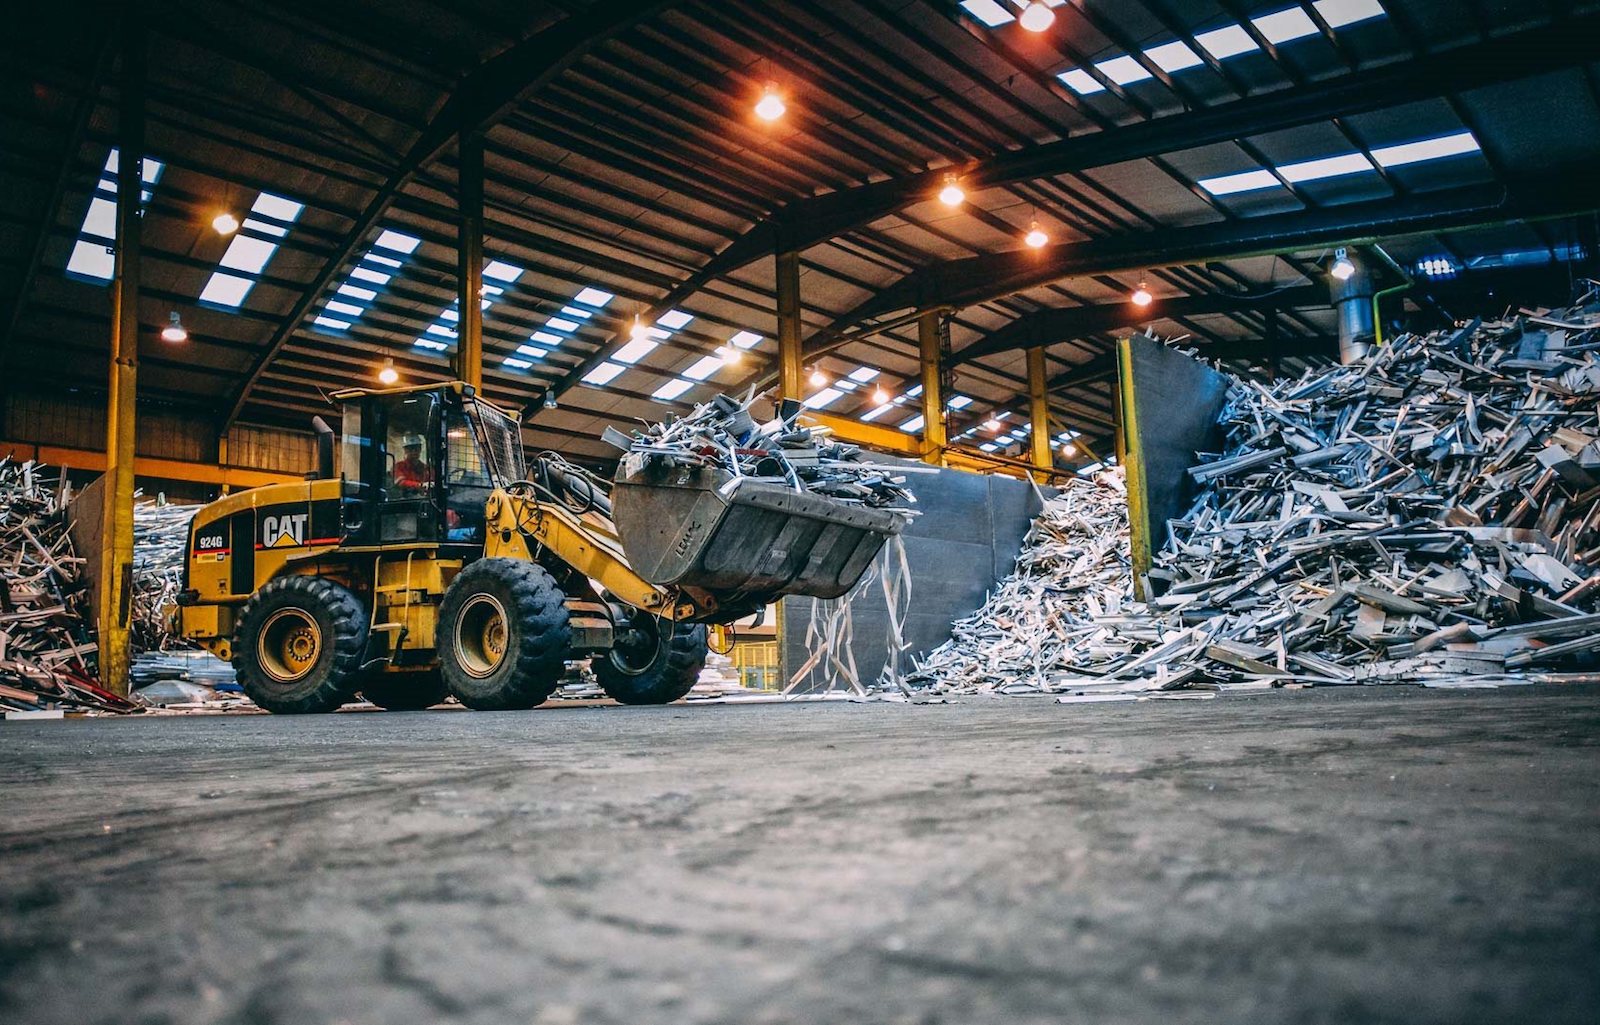 The Deeside aluminium recycling plant in the UK are getting ready to recycle even more post-consumer aluminium into new low-carbon products.